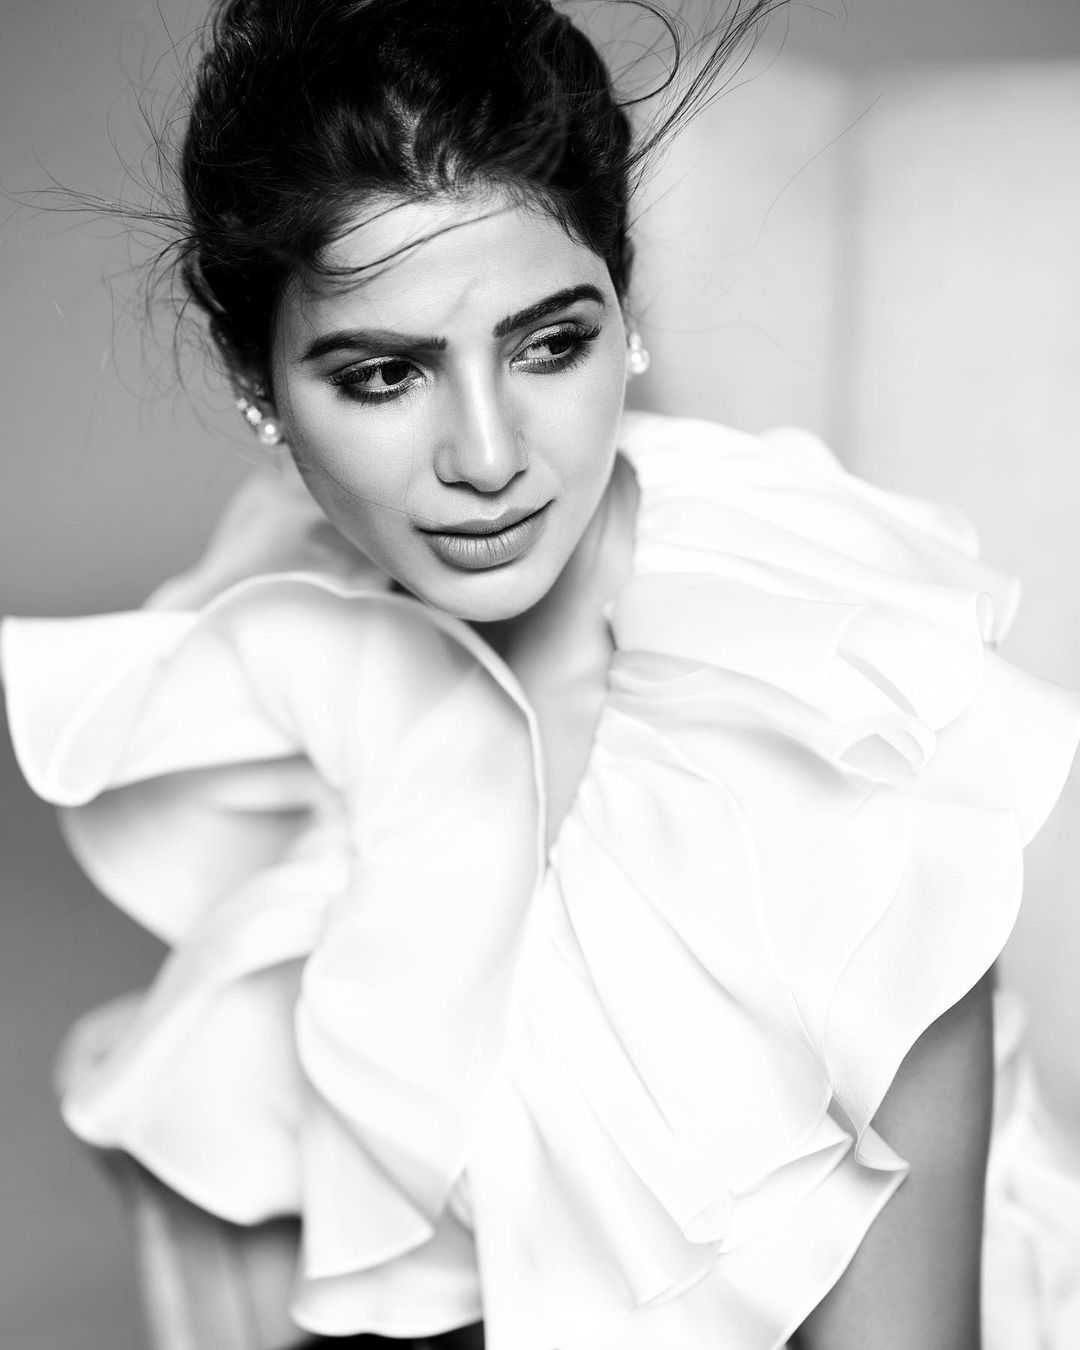 Samantha Akkineni Birthday On April 28 Pictures Which Prove She Is